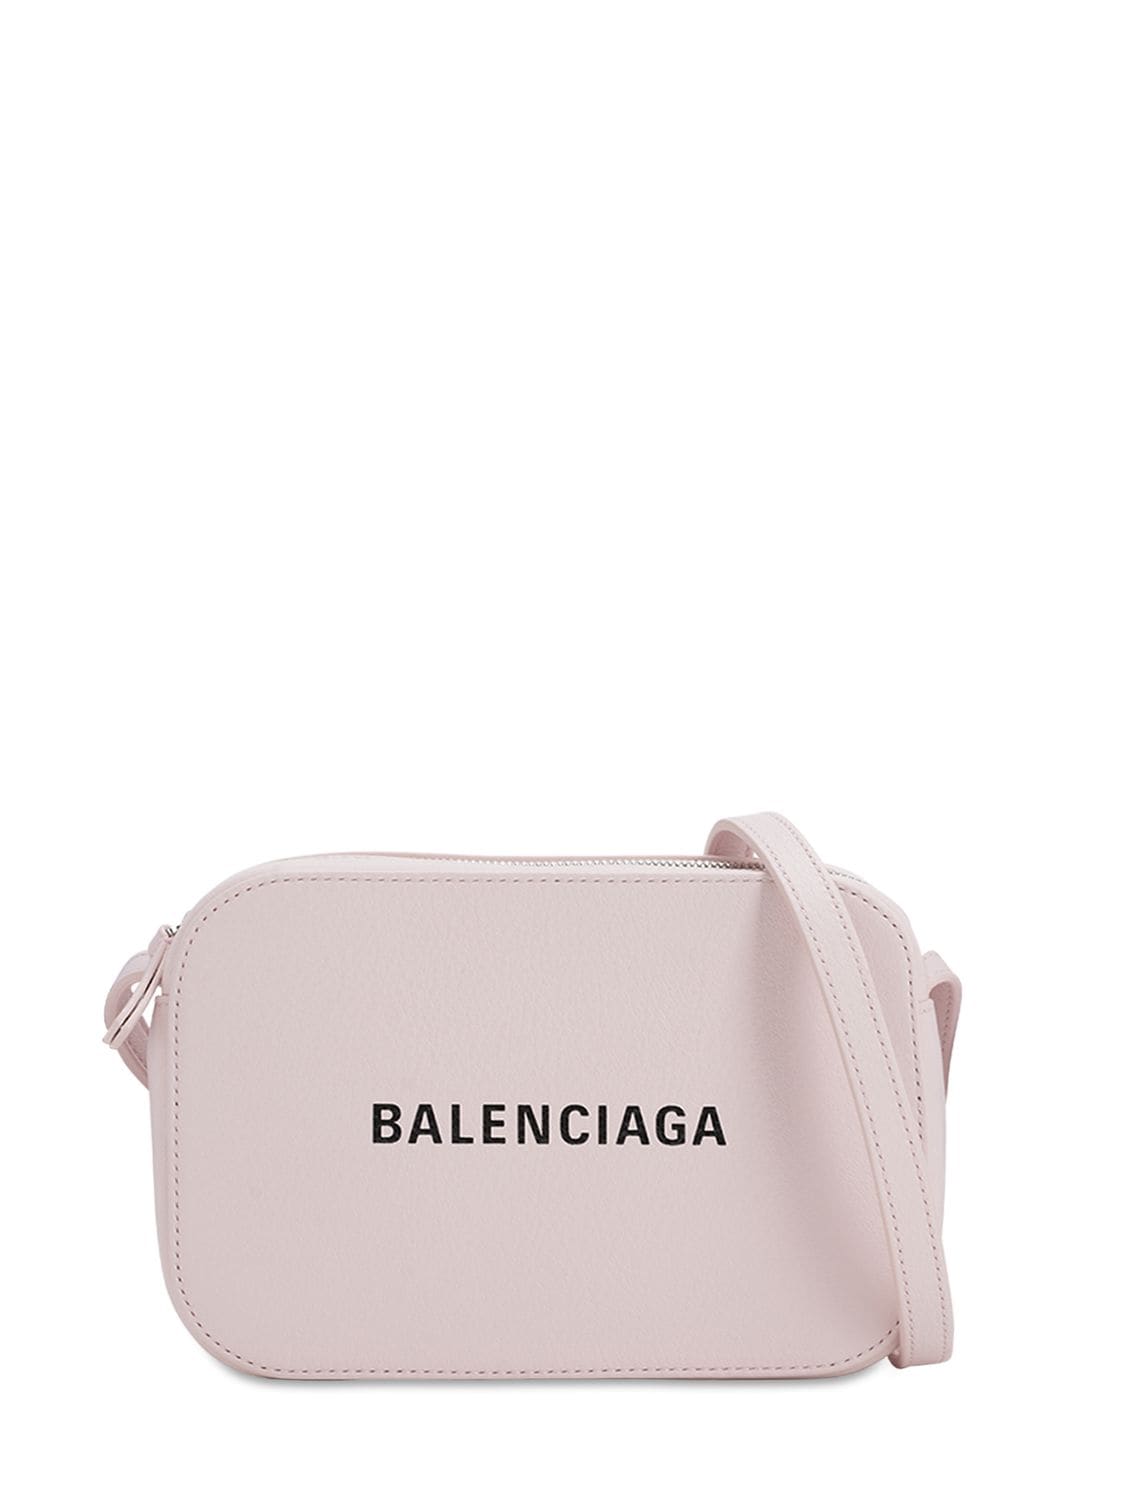 Balenciaga Xs Every Day Leather Camera Bag In Light Rose